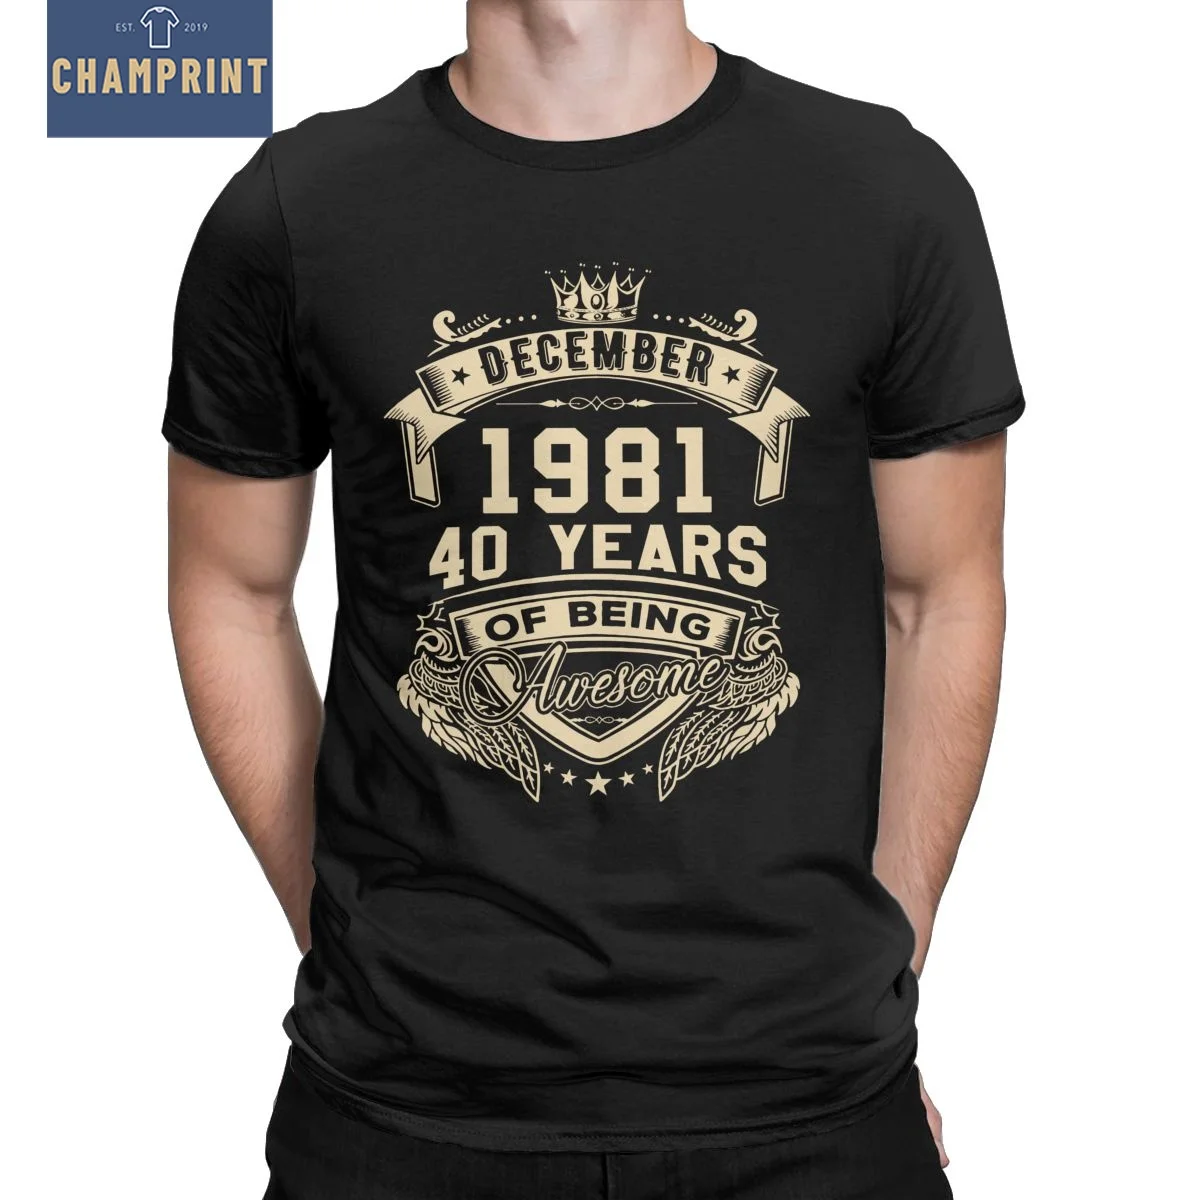 

Born In December 1981 40 Years Of Being Awesome Limited T-Shirt for Men 40th Birthday T Shirt Cotton Tee Shirt Big Size Tops